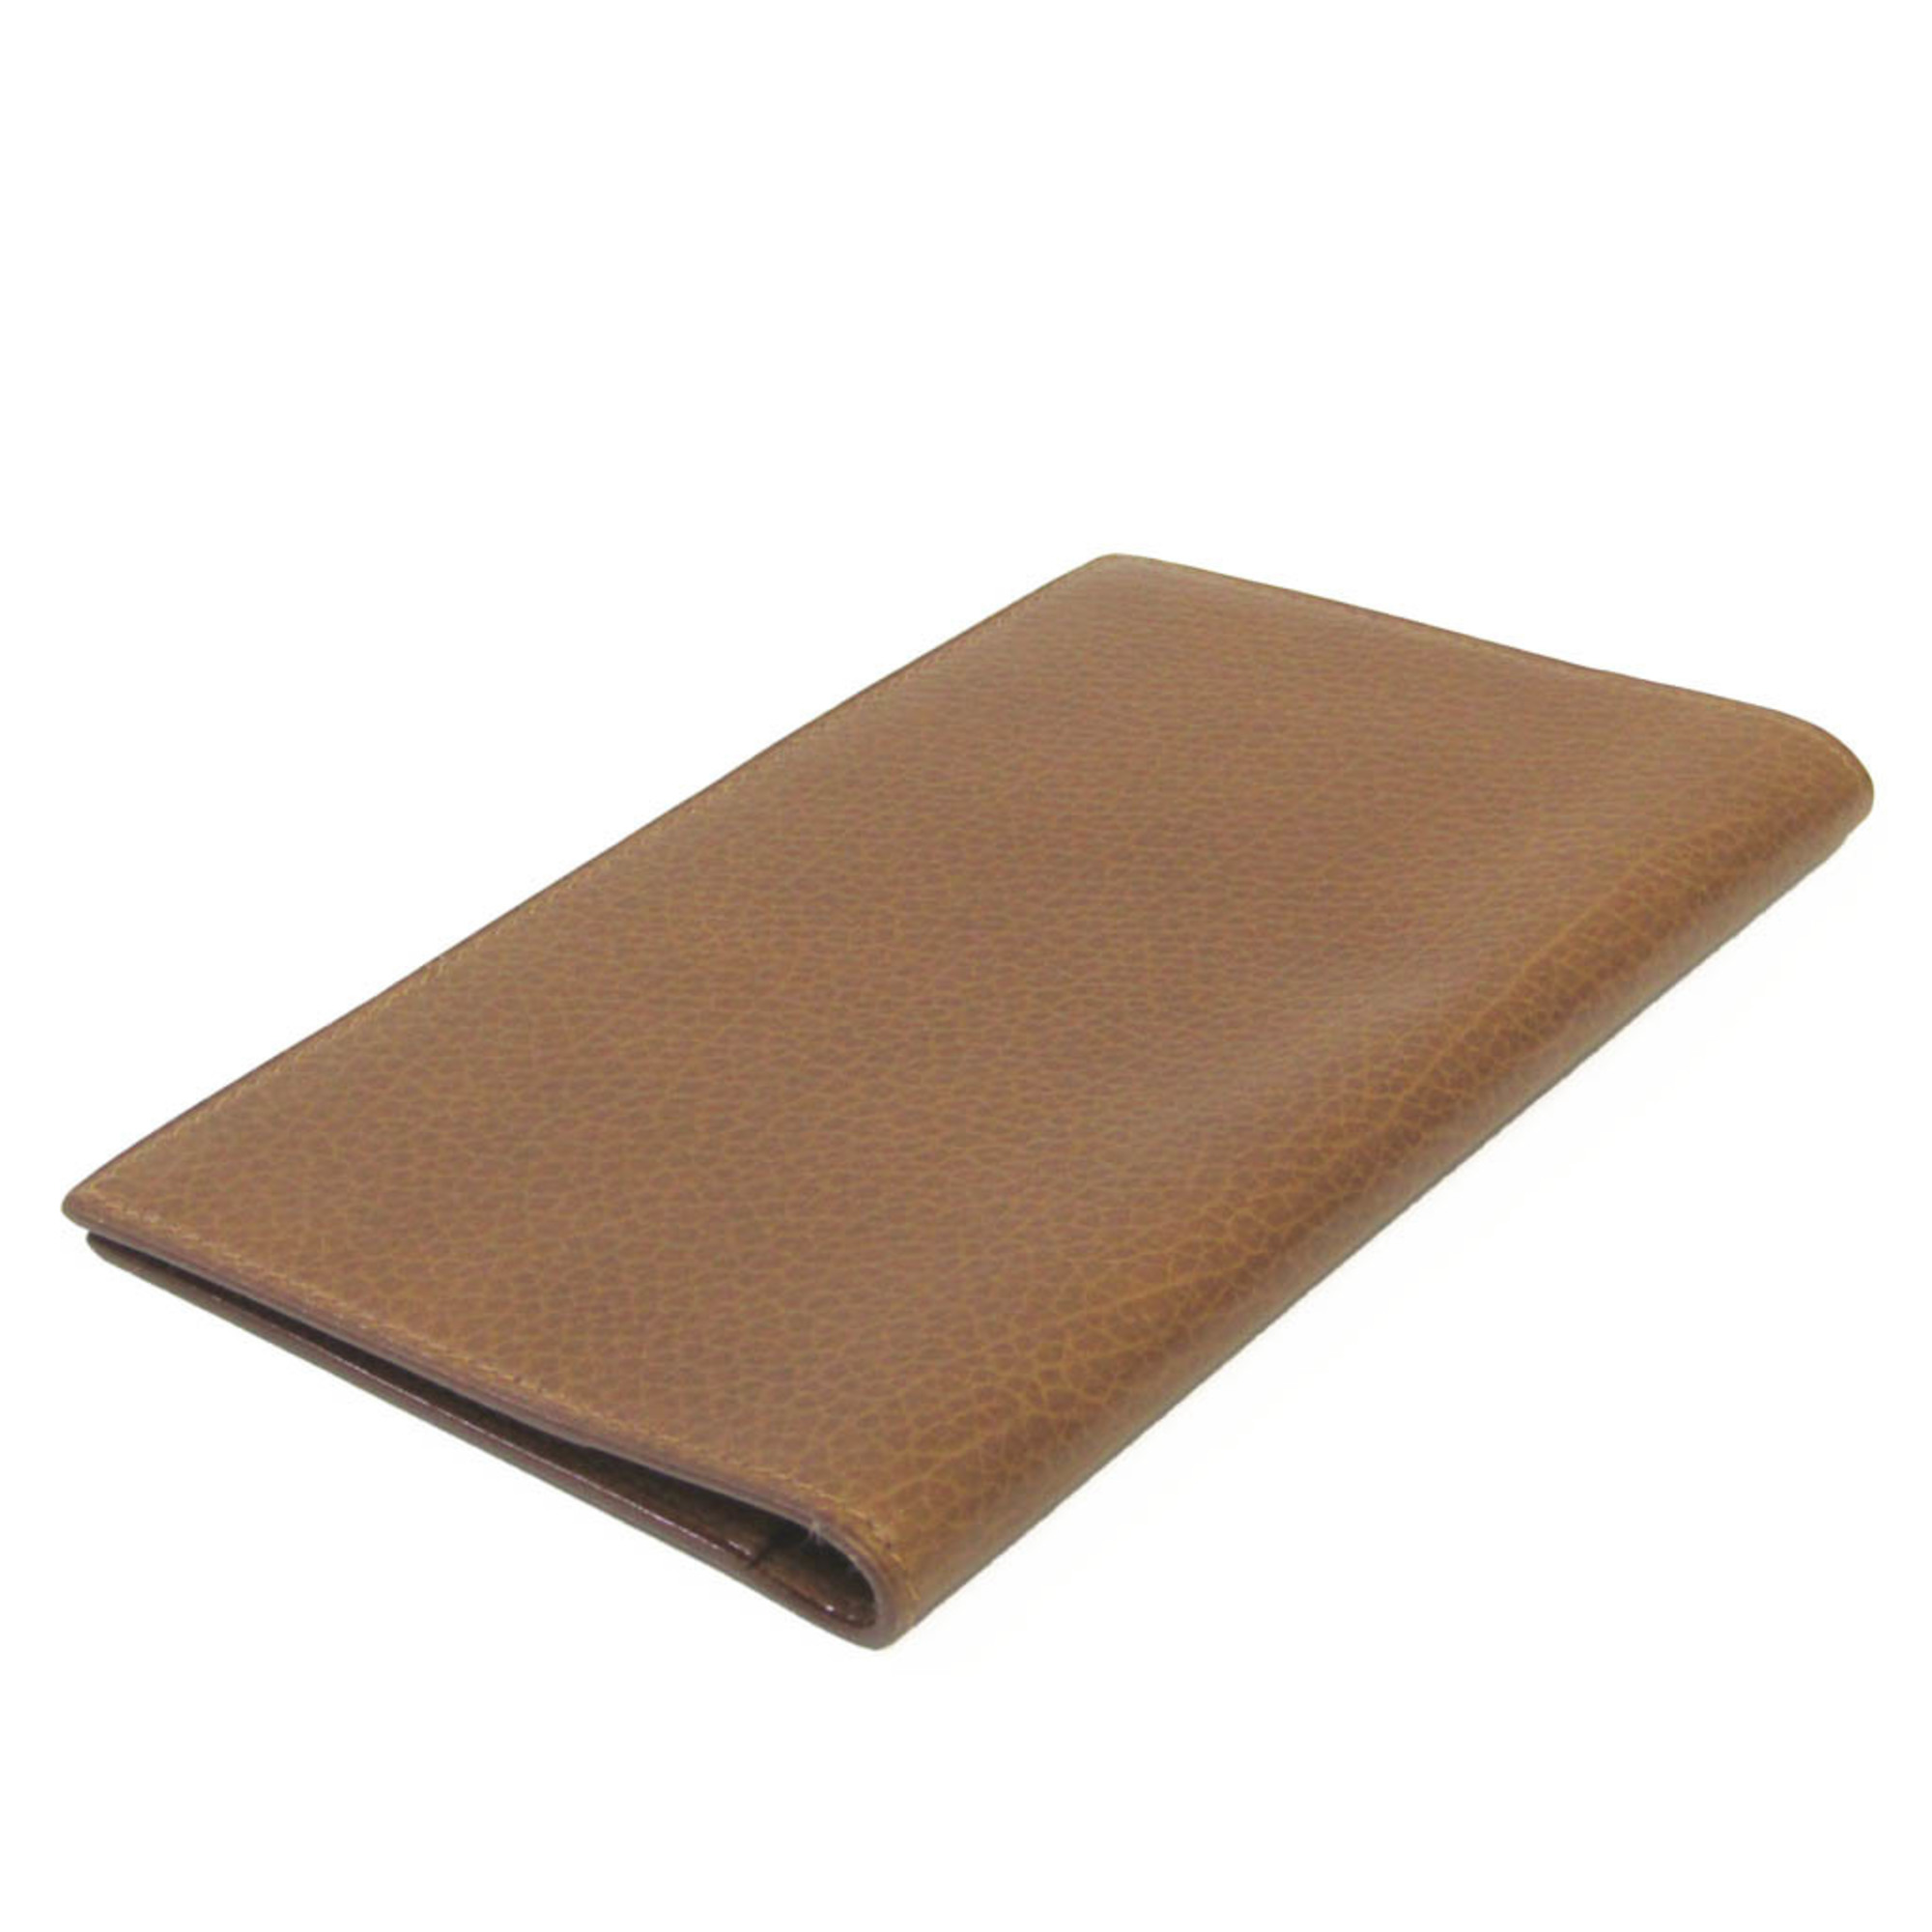 Hermes Agenda A6 Planner Cover Brown Vision